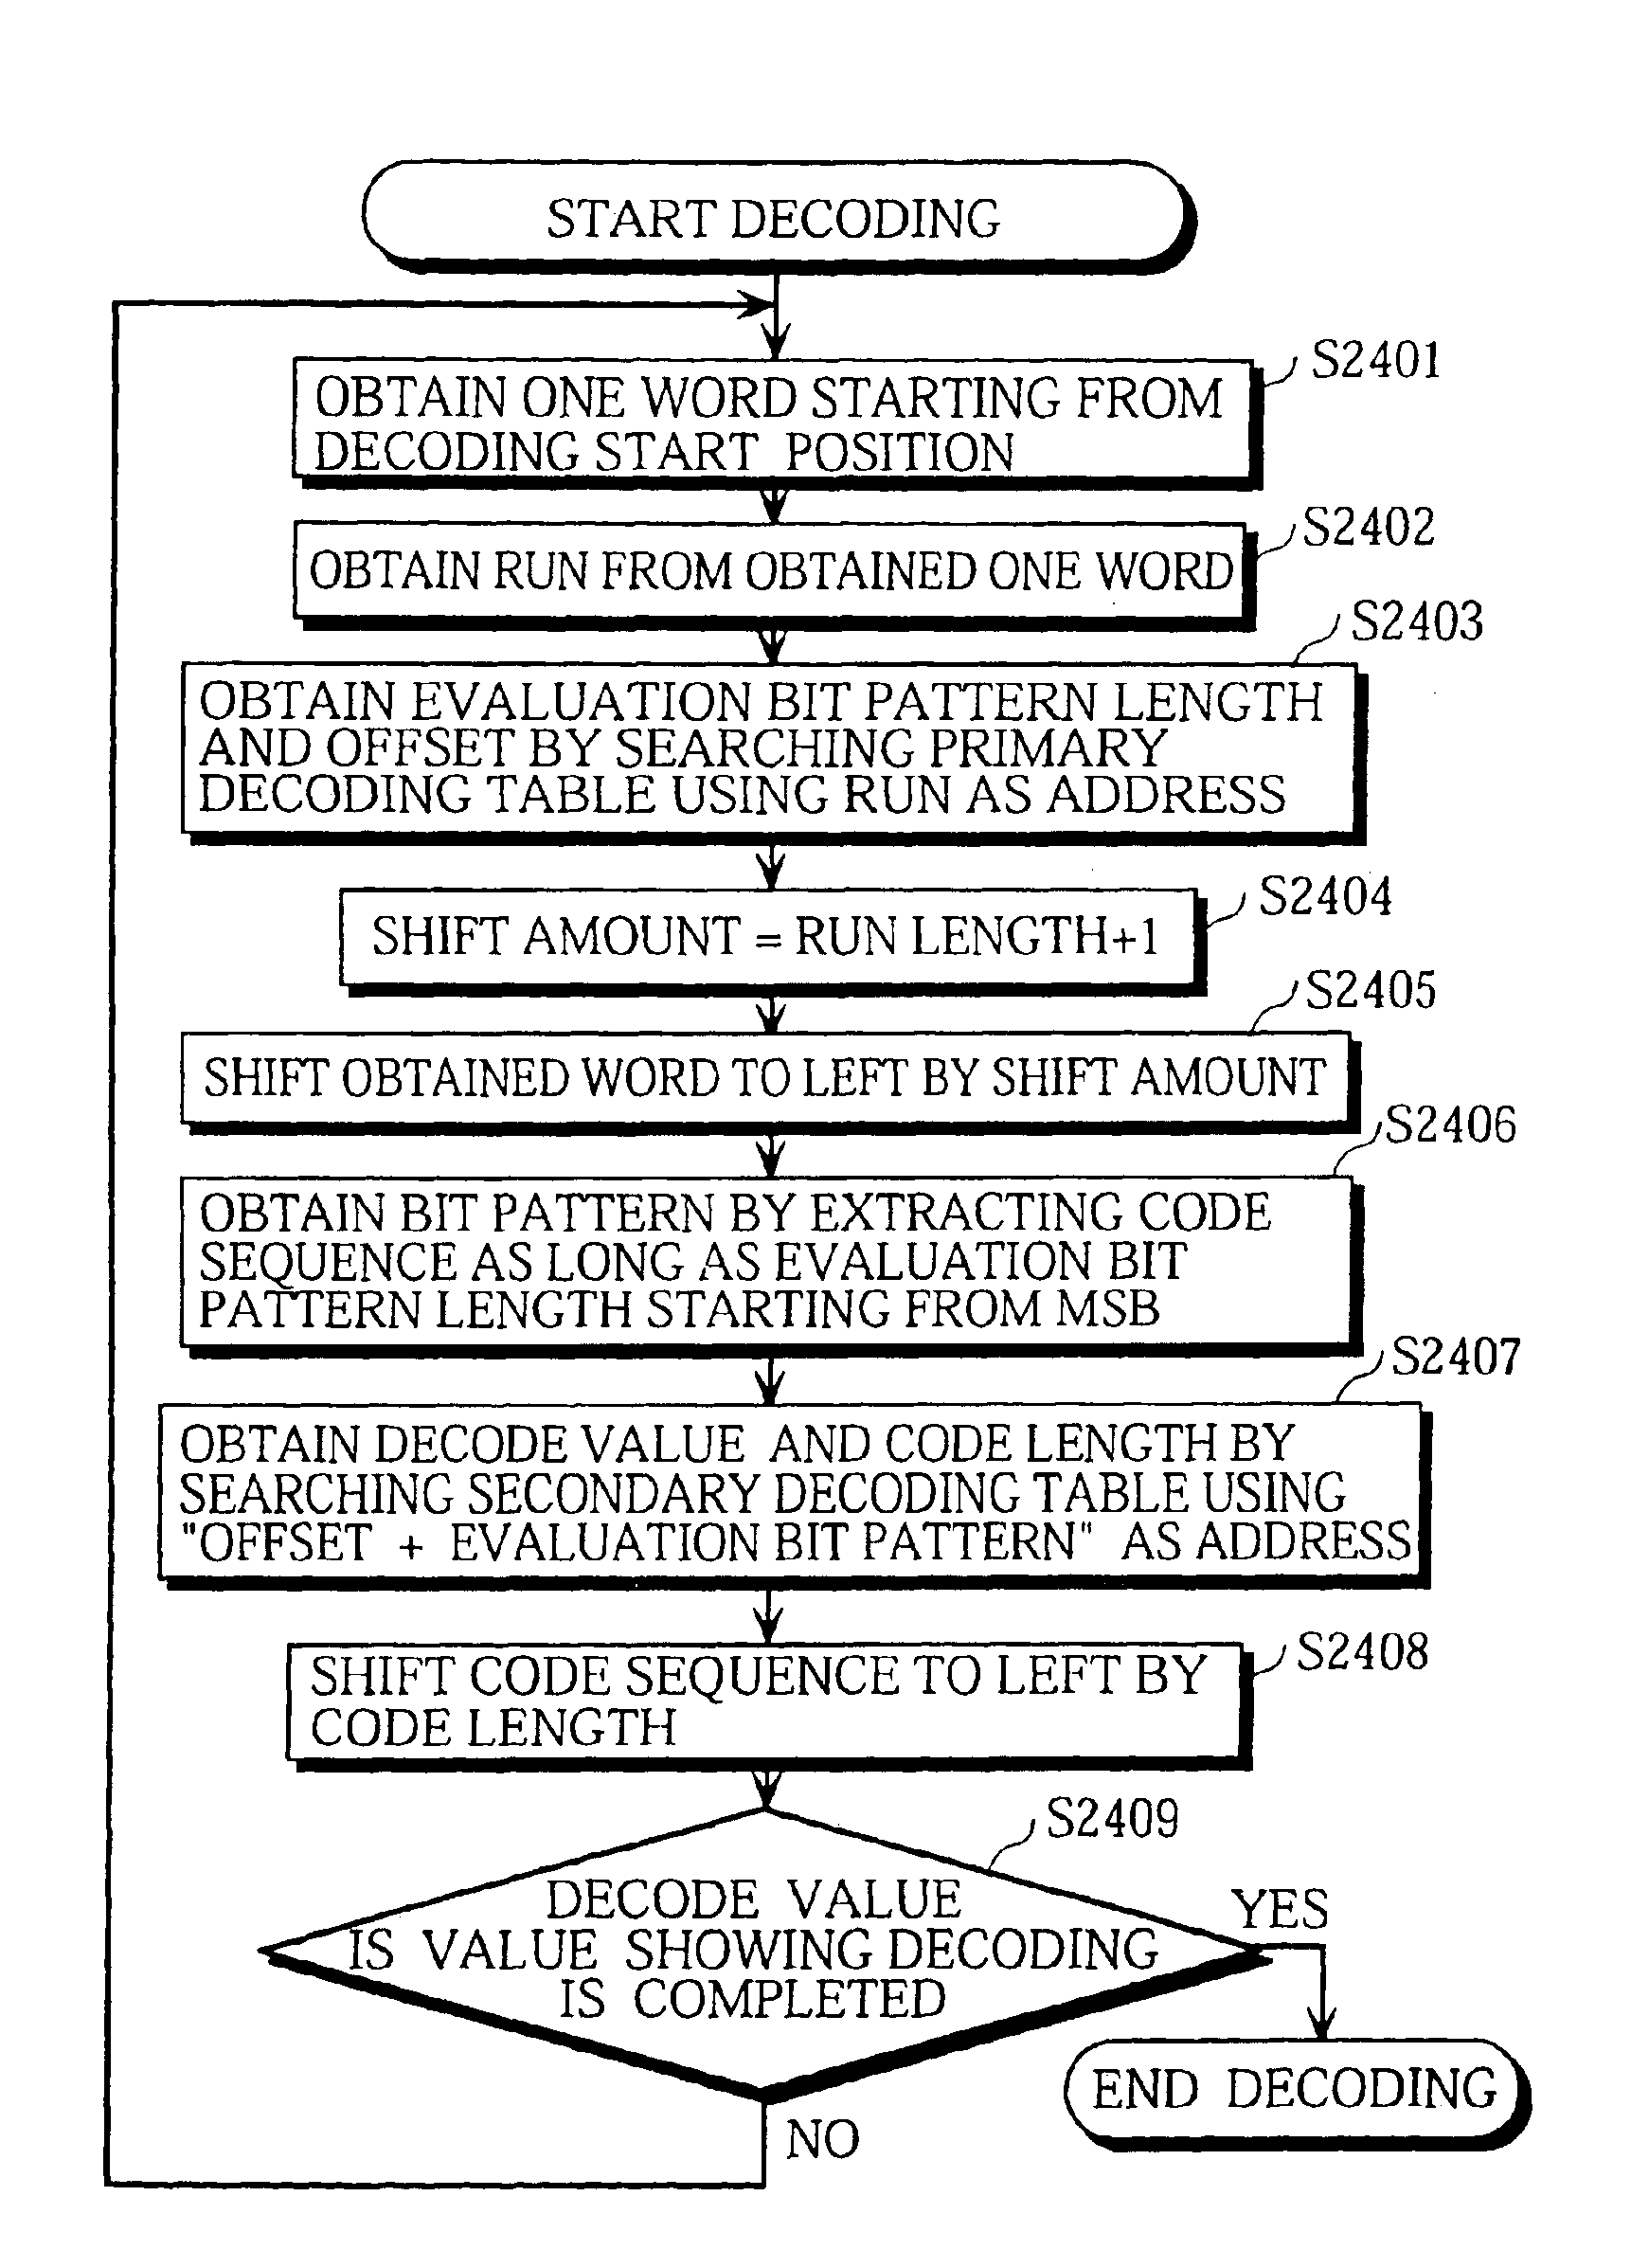 Image coding and decoding apparatus, method of image coding and decoding, and recording medium for recording program for image coding and decoding